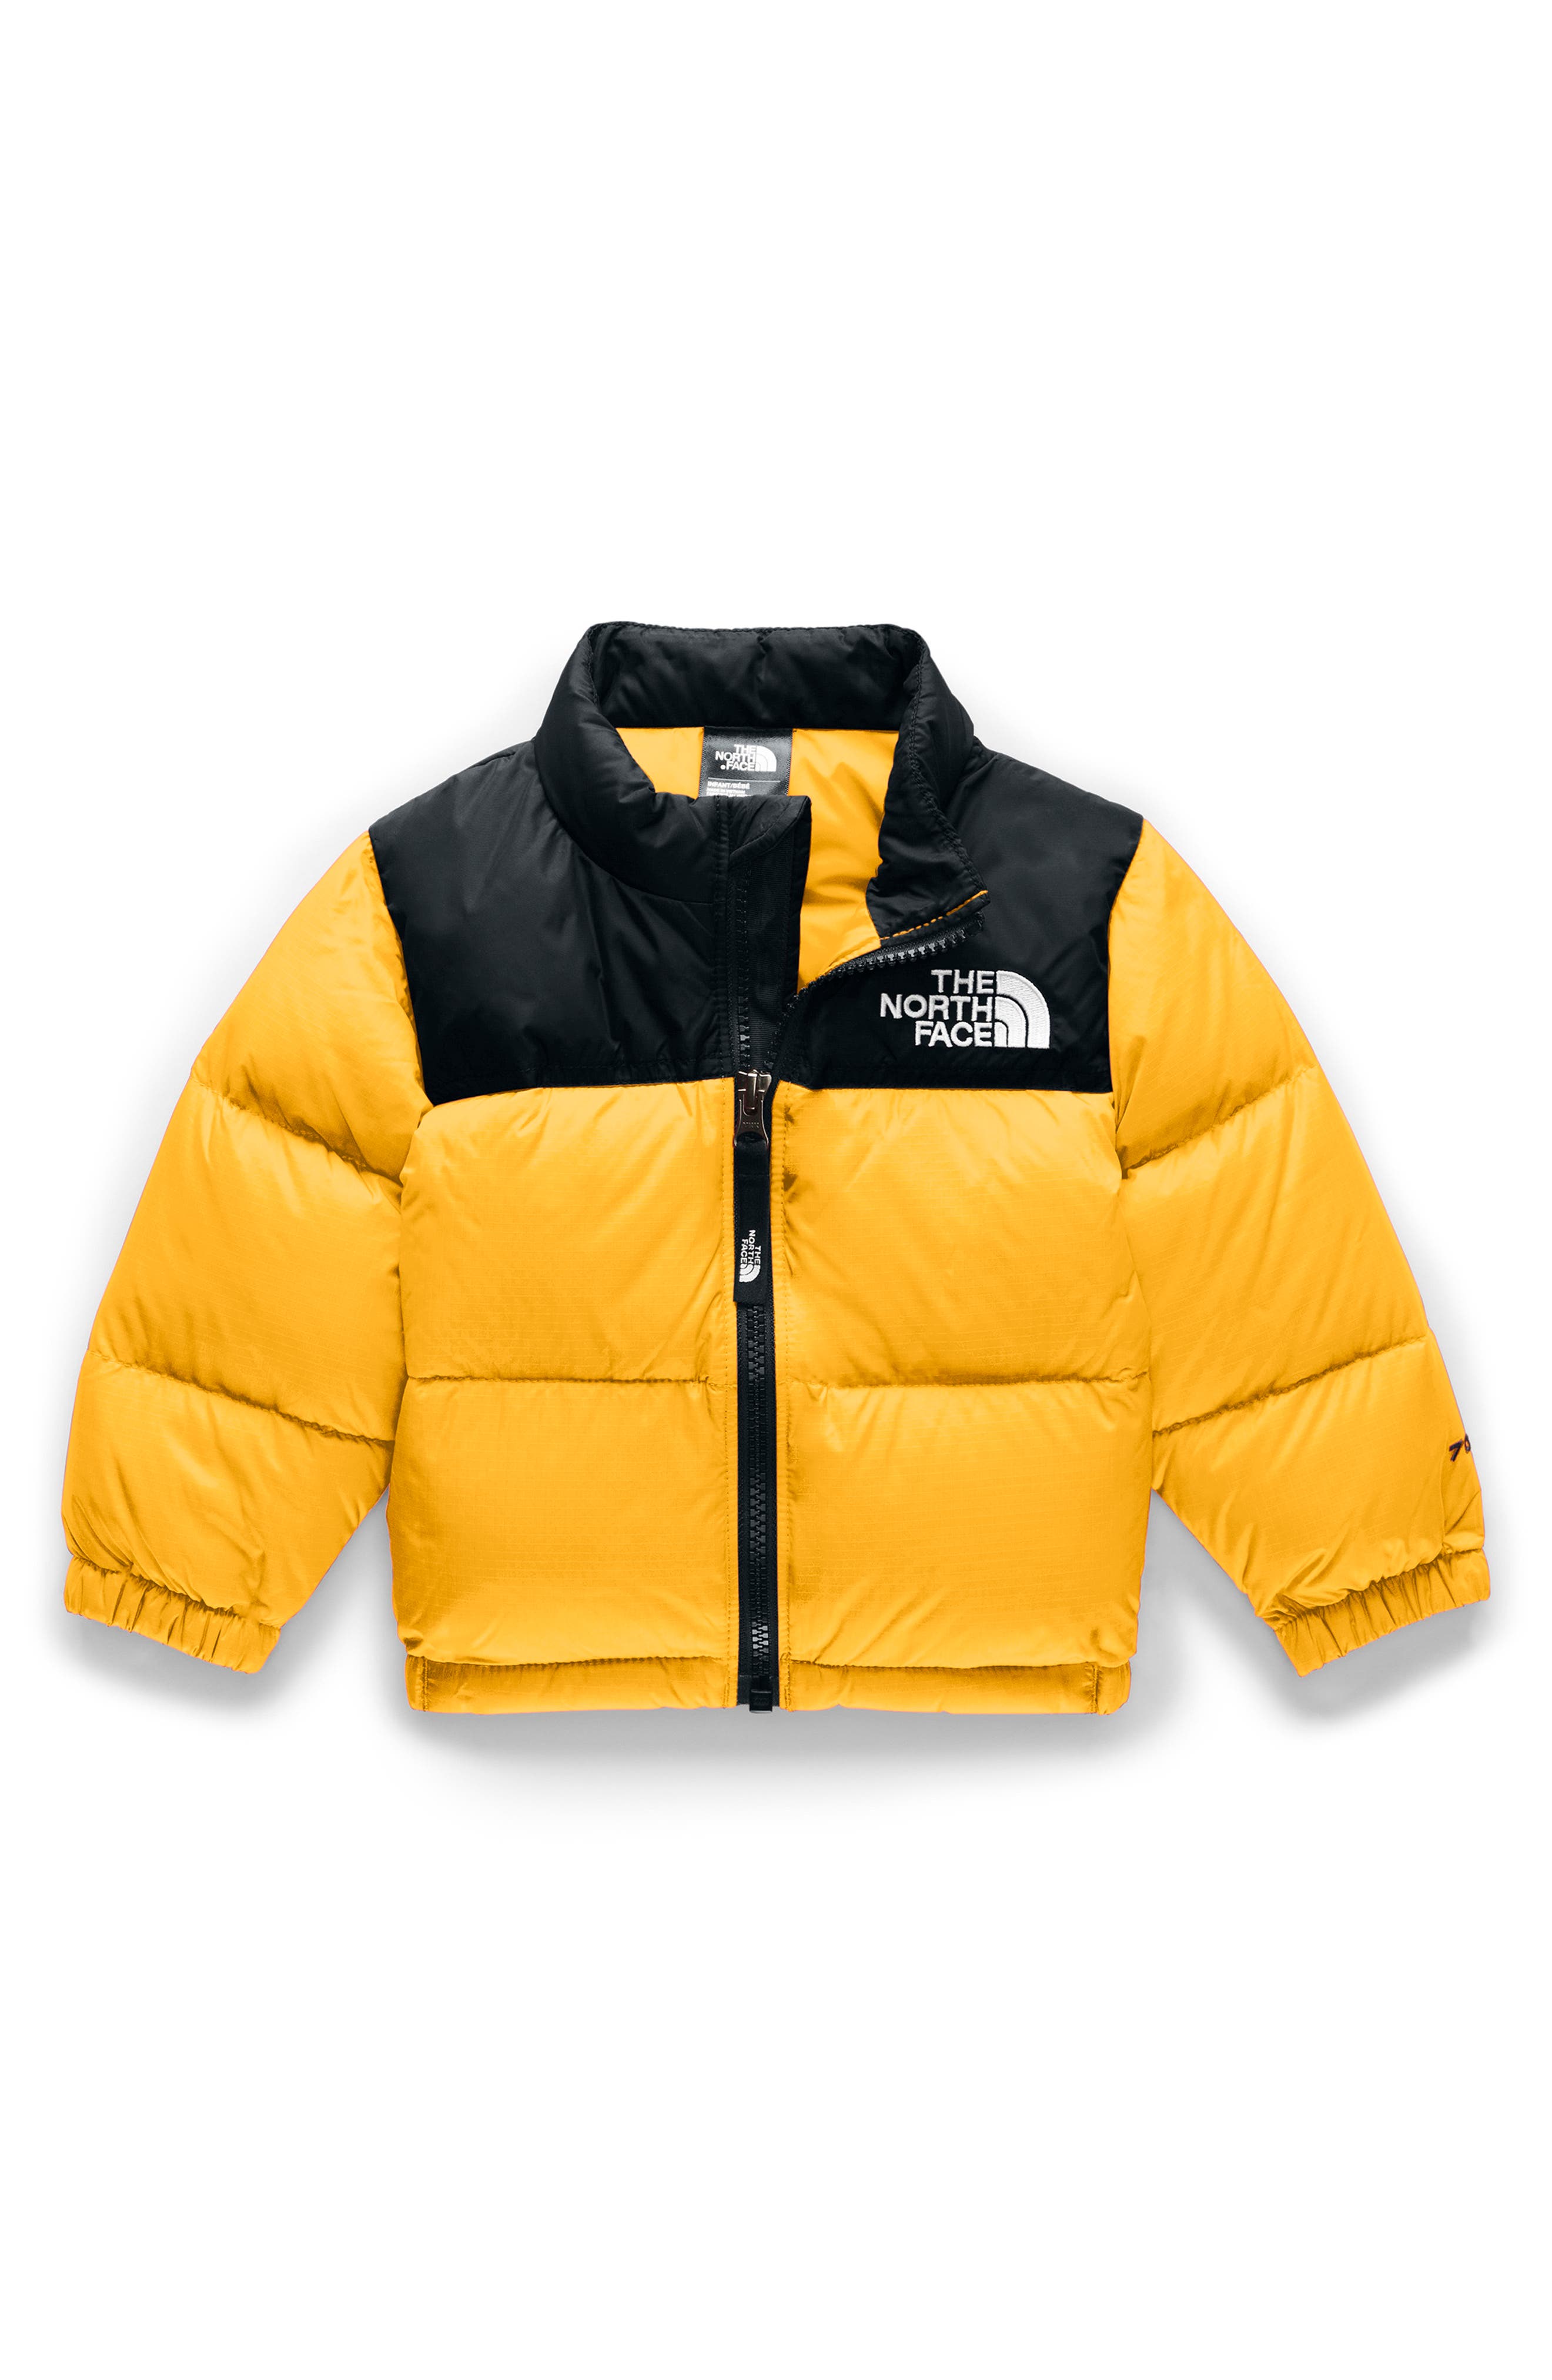 north face coats for infants